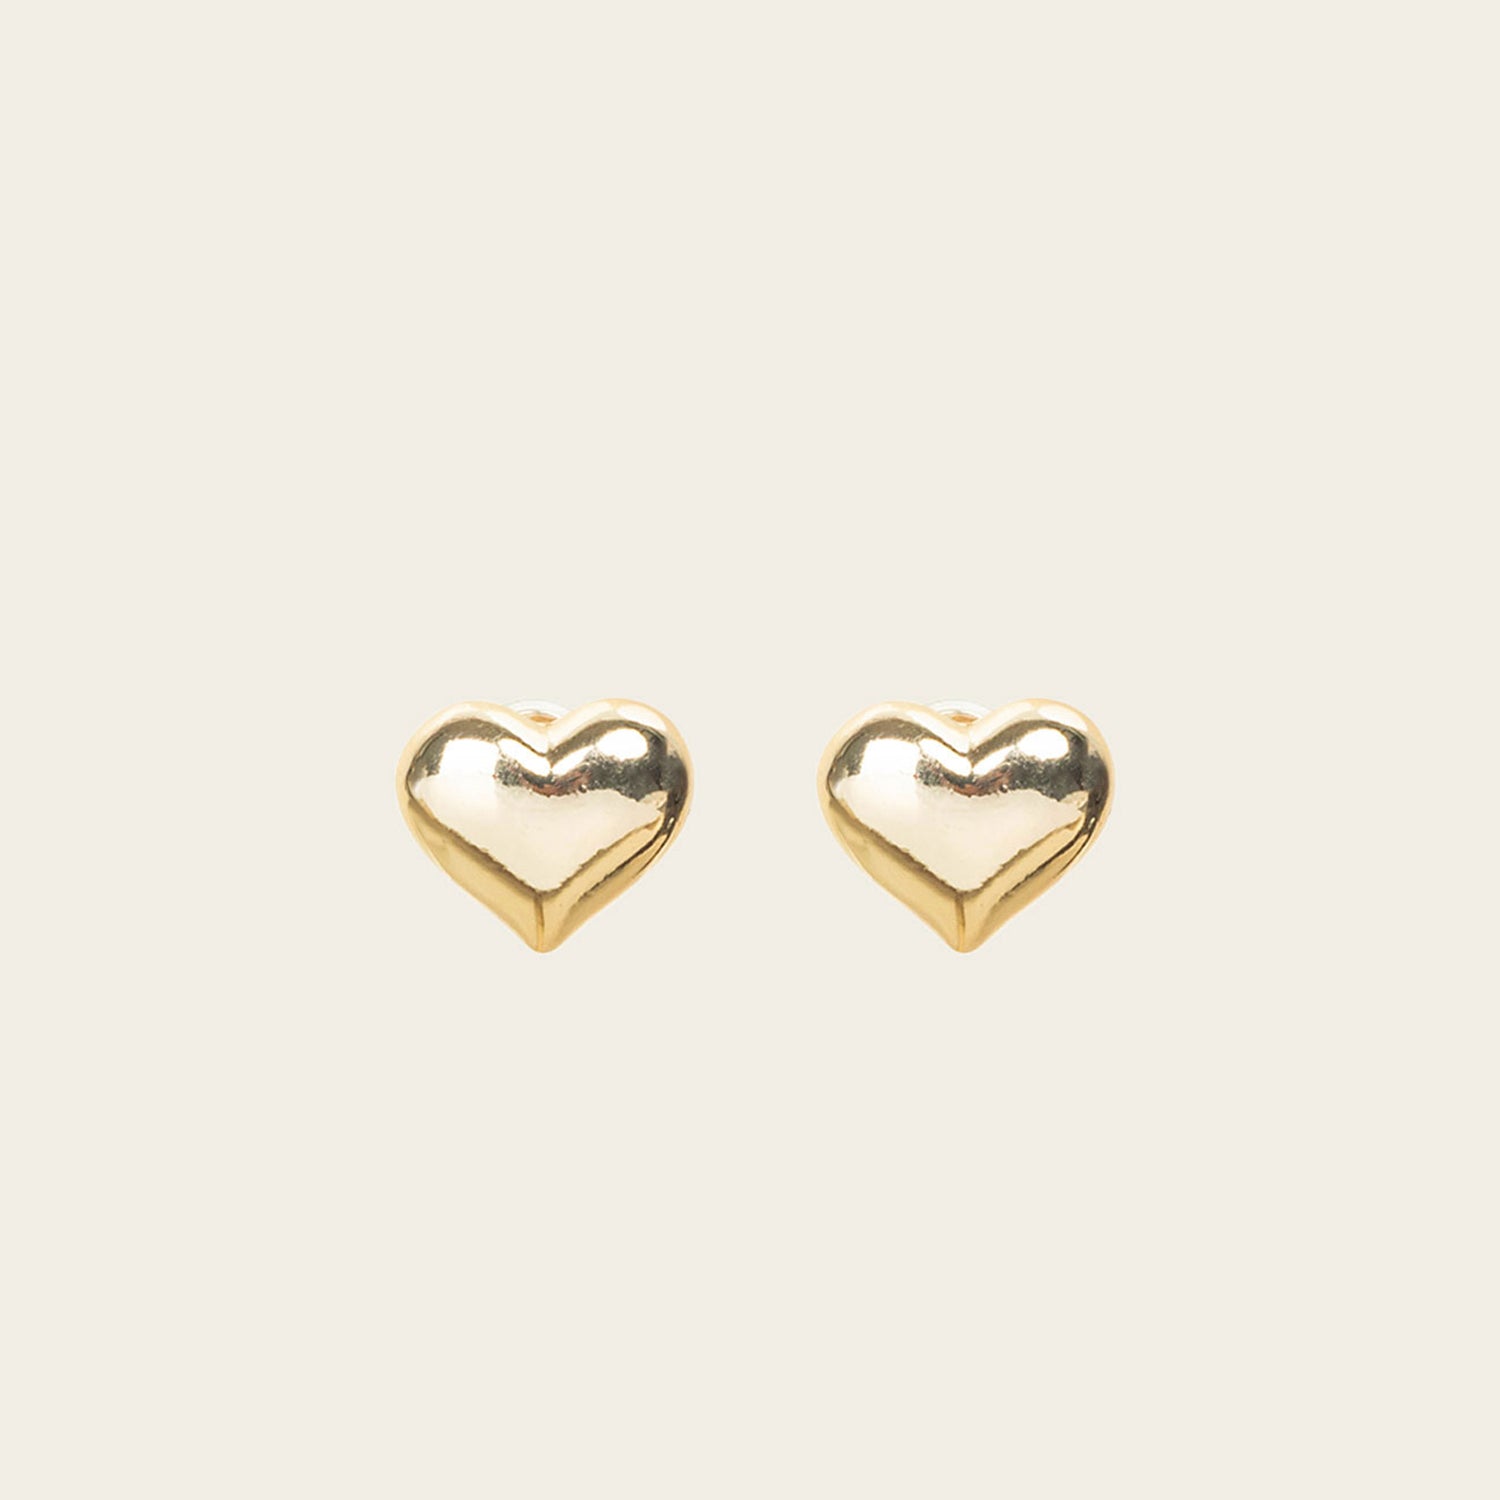 Image of the Coeur Clip On Earrings in Gold offer a medium-strength, adjustable hold via a mosquito coil clip. Ideal for all ear types, these earrings provide a secure yet comfortable fit for up to 24 hours. Crafted with Zinc Alloy and Copper, each purchase contains a single pair.